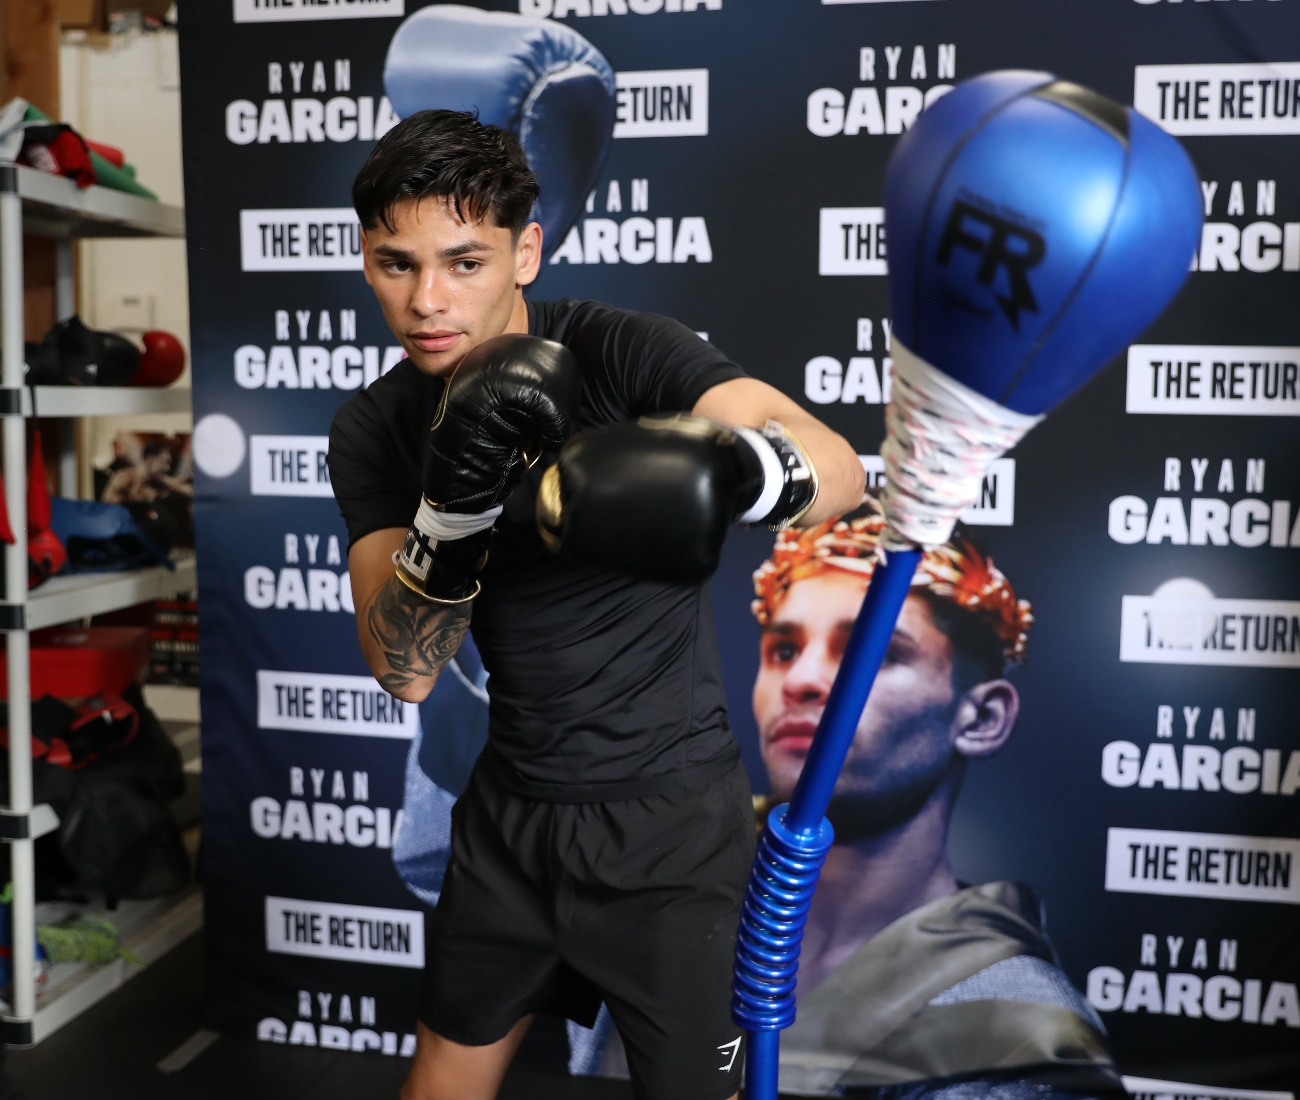 Image: Ryan Garcia to begin his "dynasty" on April 9th